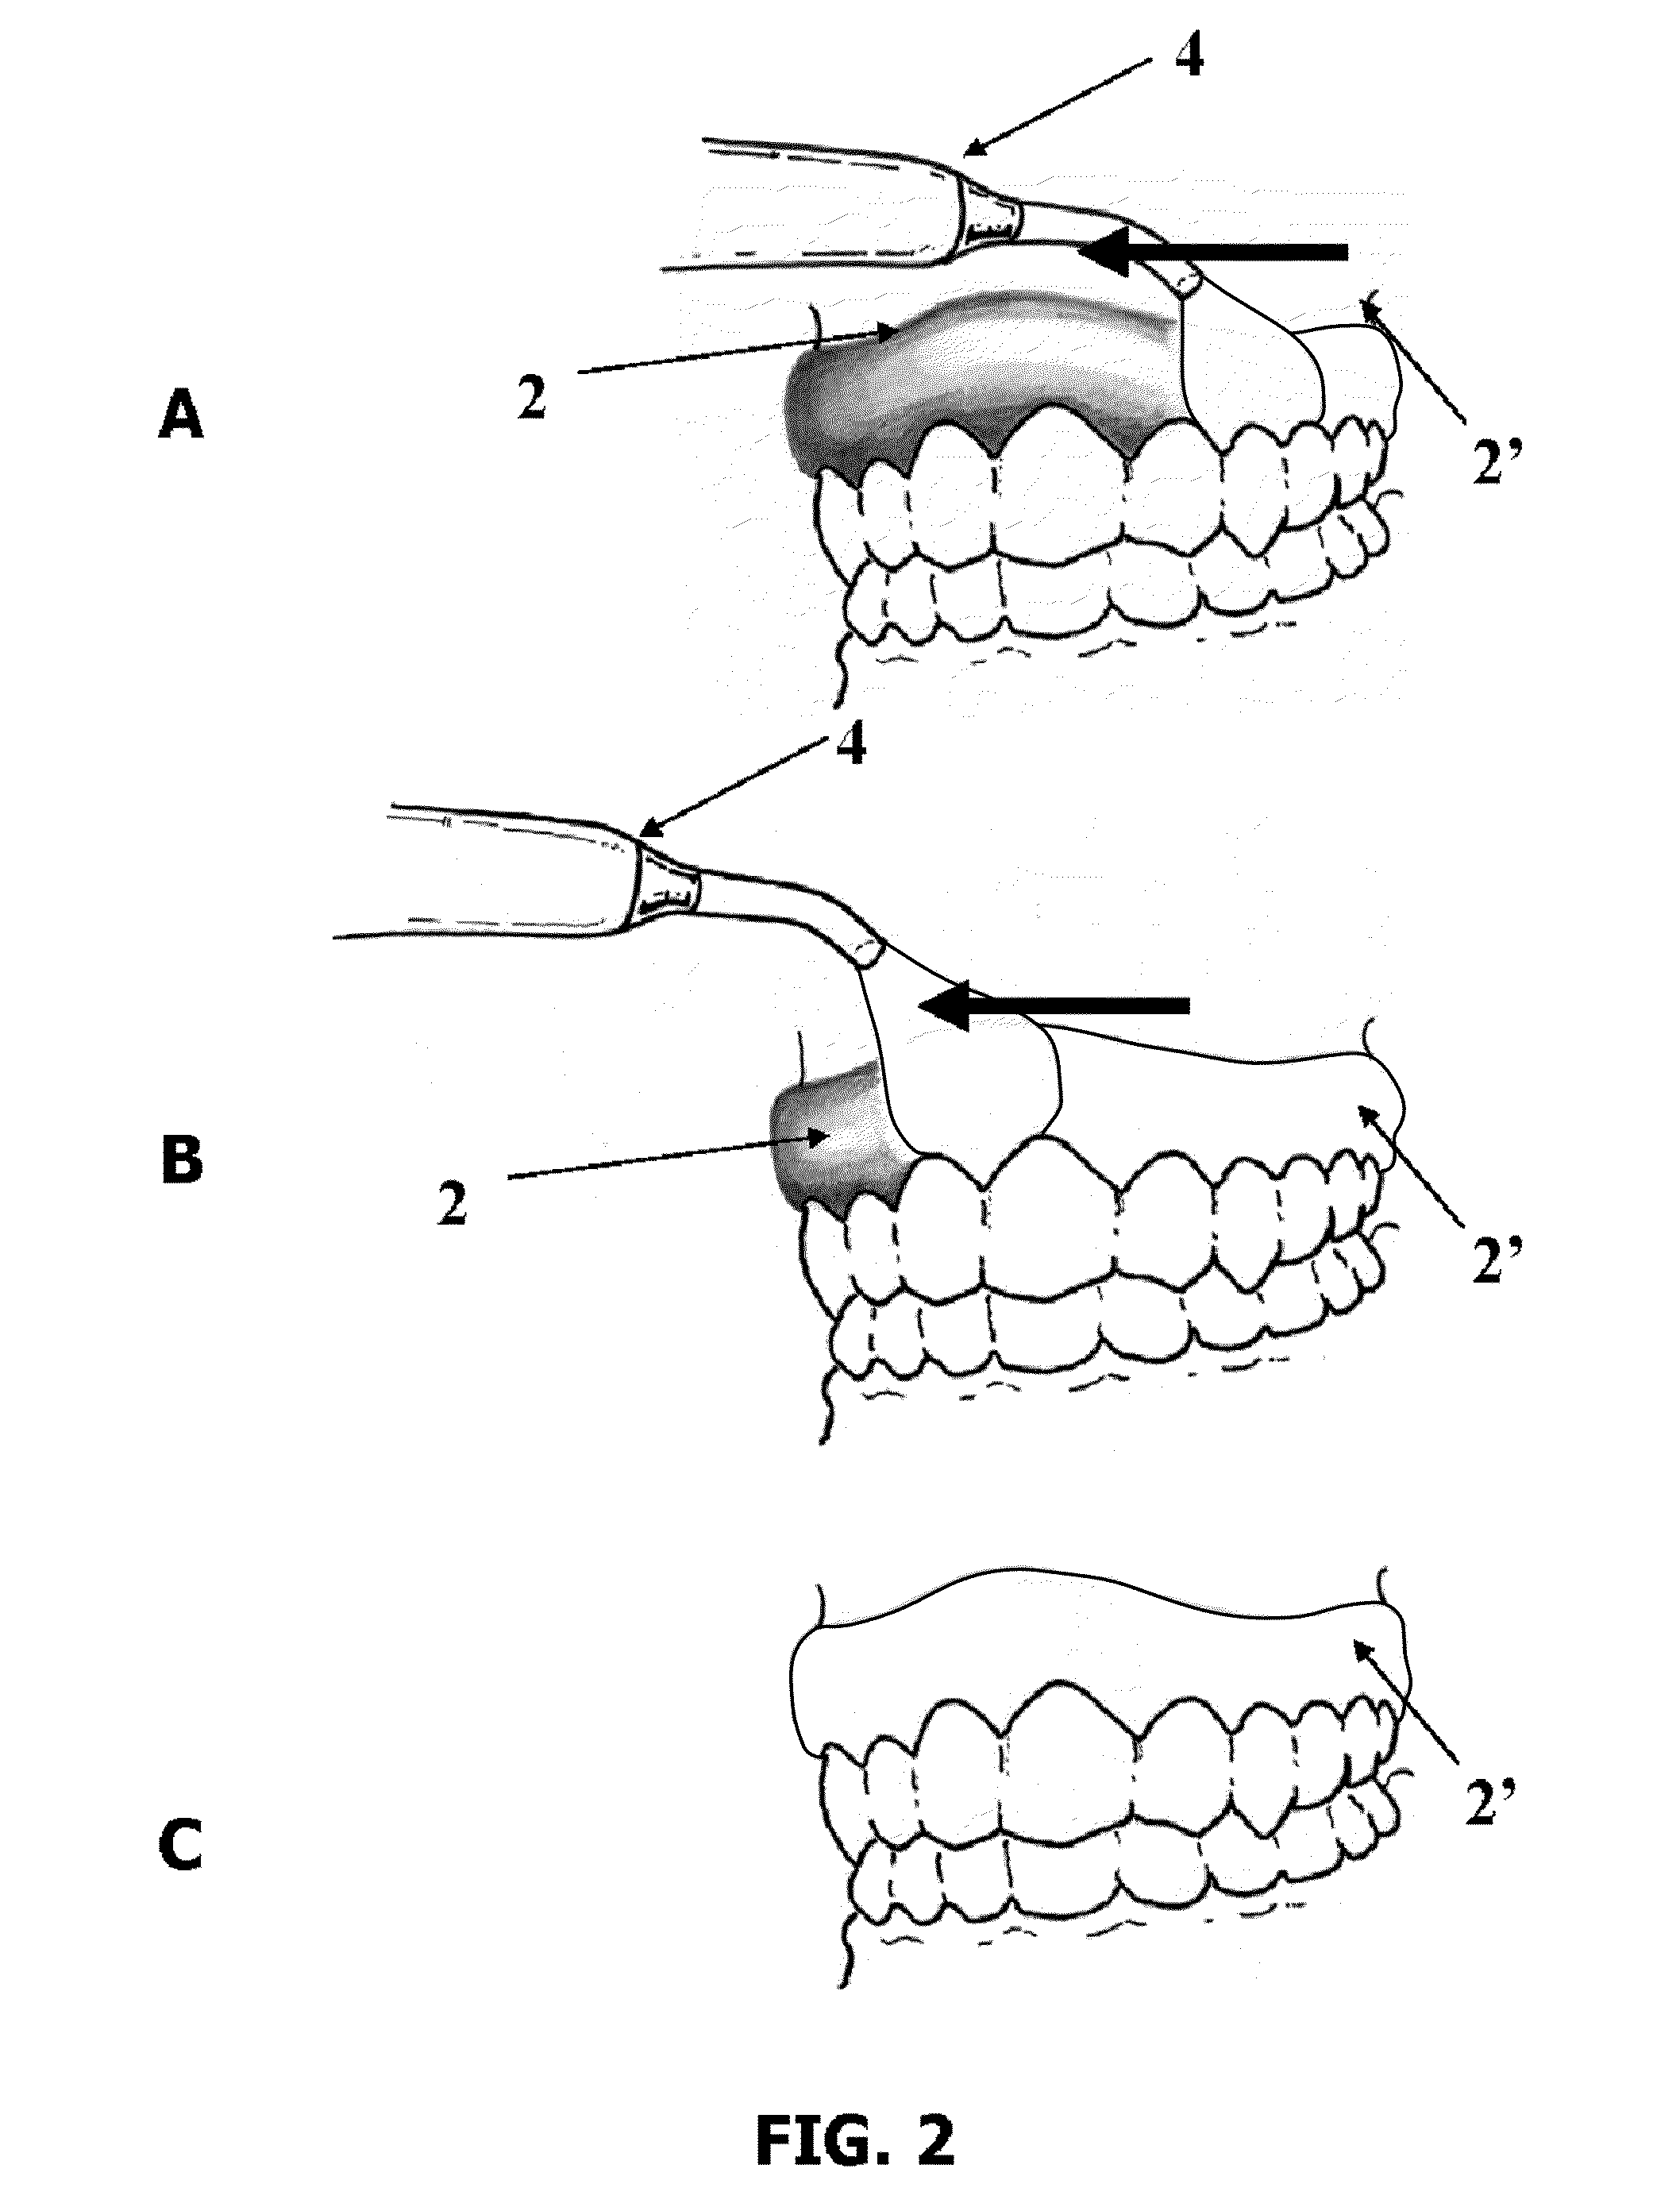 Composition for dental barrier comprising at least one monomer, at least one polymerization initiating system, and at least one indicator enabling the polymerization reaction to be monitored